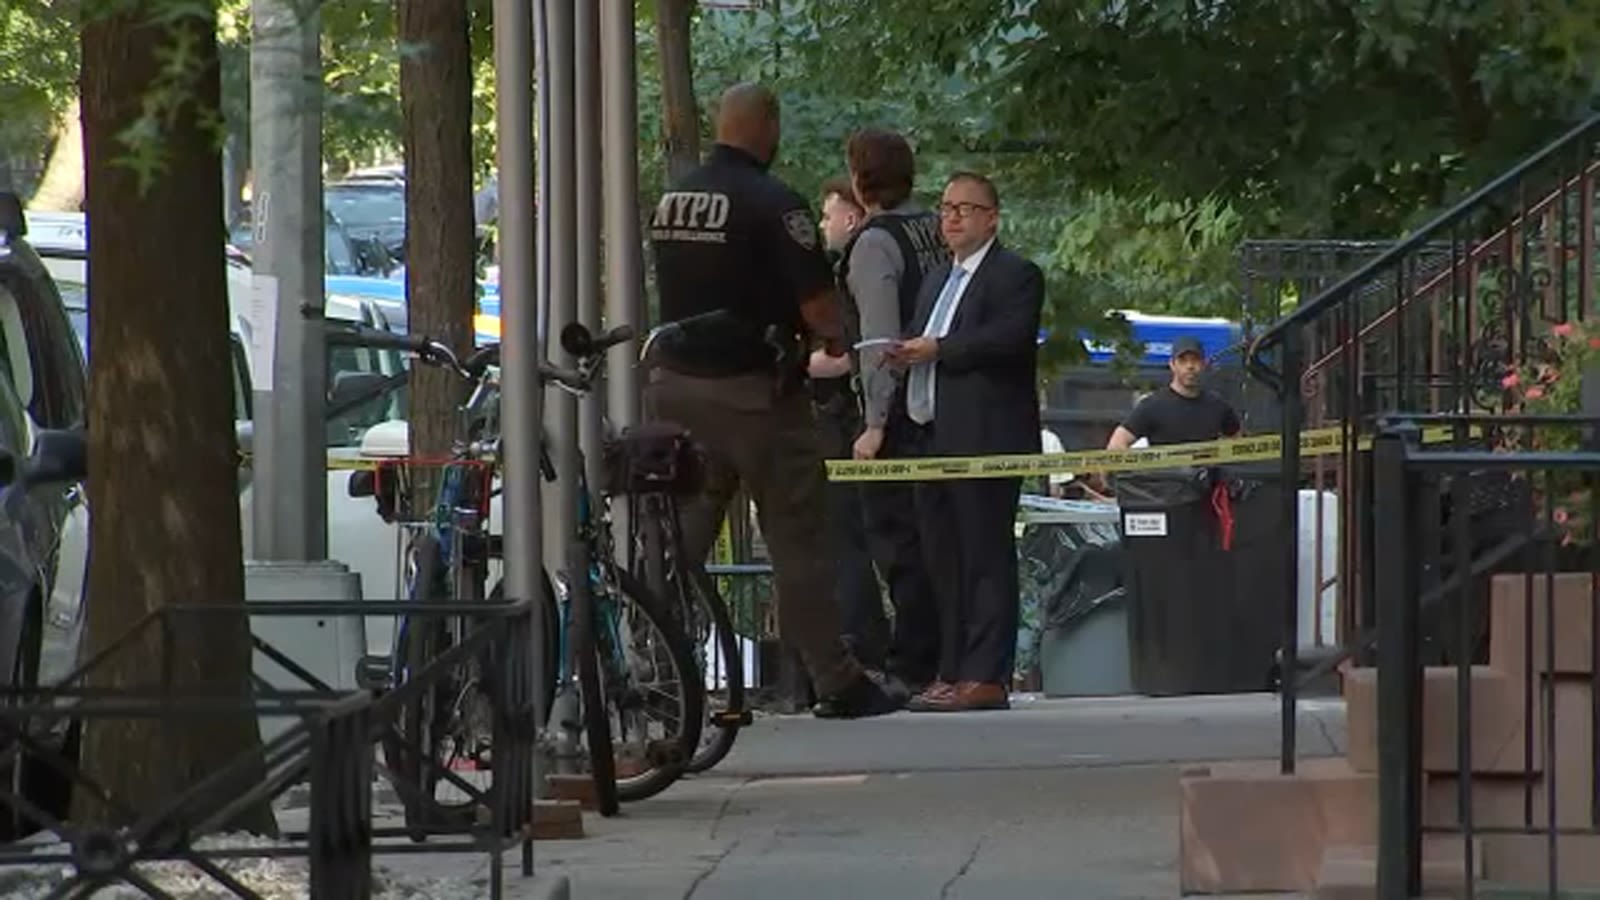 Retired Cook County probation officer shoots woman in NYC murder-suicide, police say